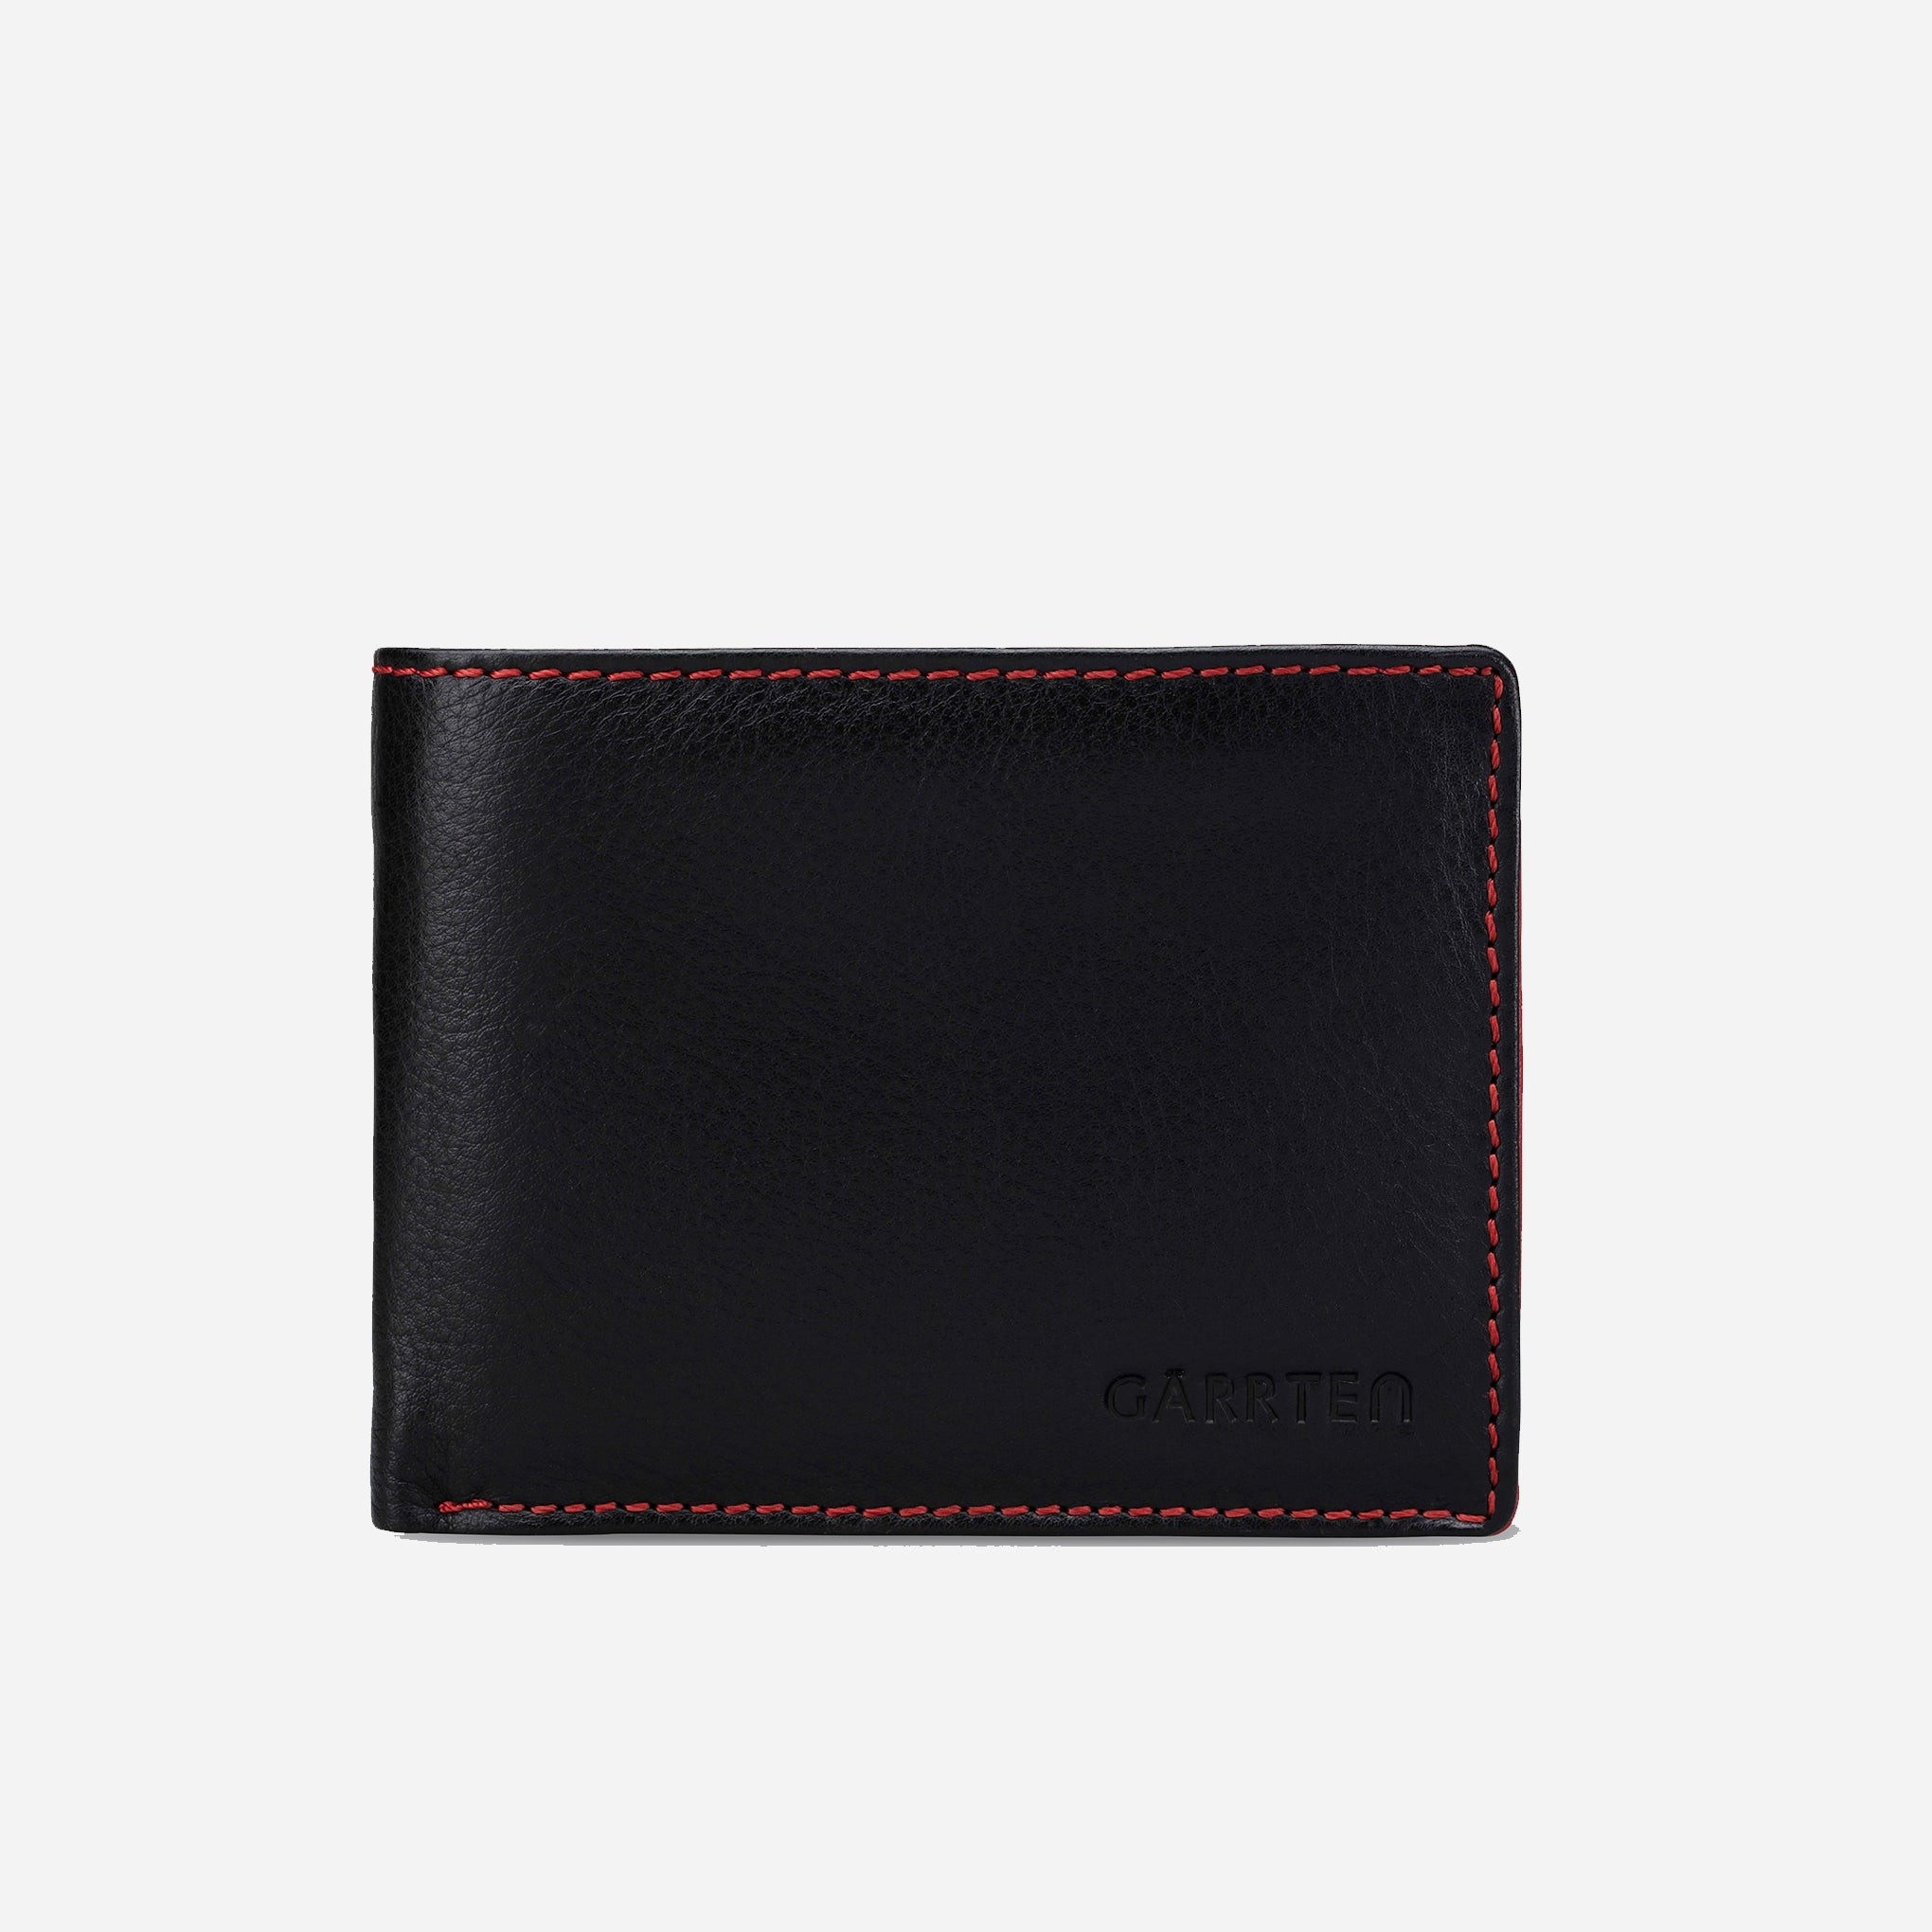 Buy Suede Leather Wallet,bifold Wallet,hand Stitched Men Leather Purse,men's  Wallet With Card Slots and Coin Pocket,leather Card Wallet Online in India  - Etsy